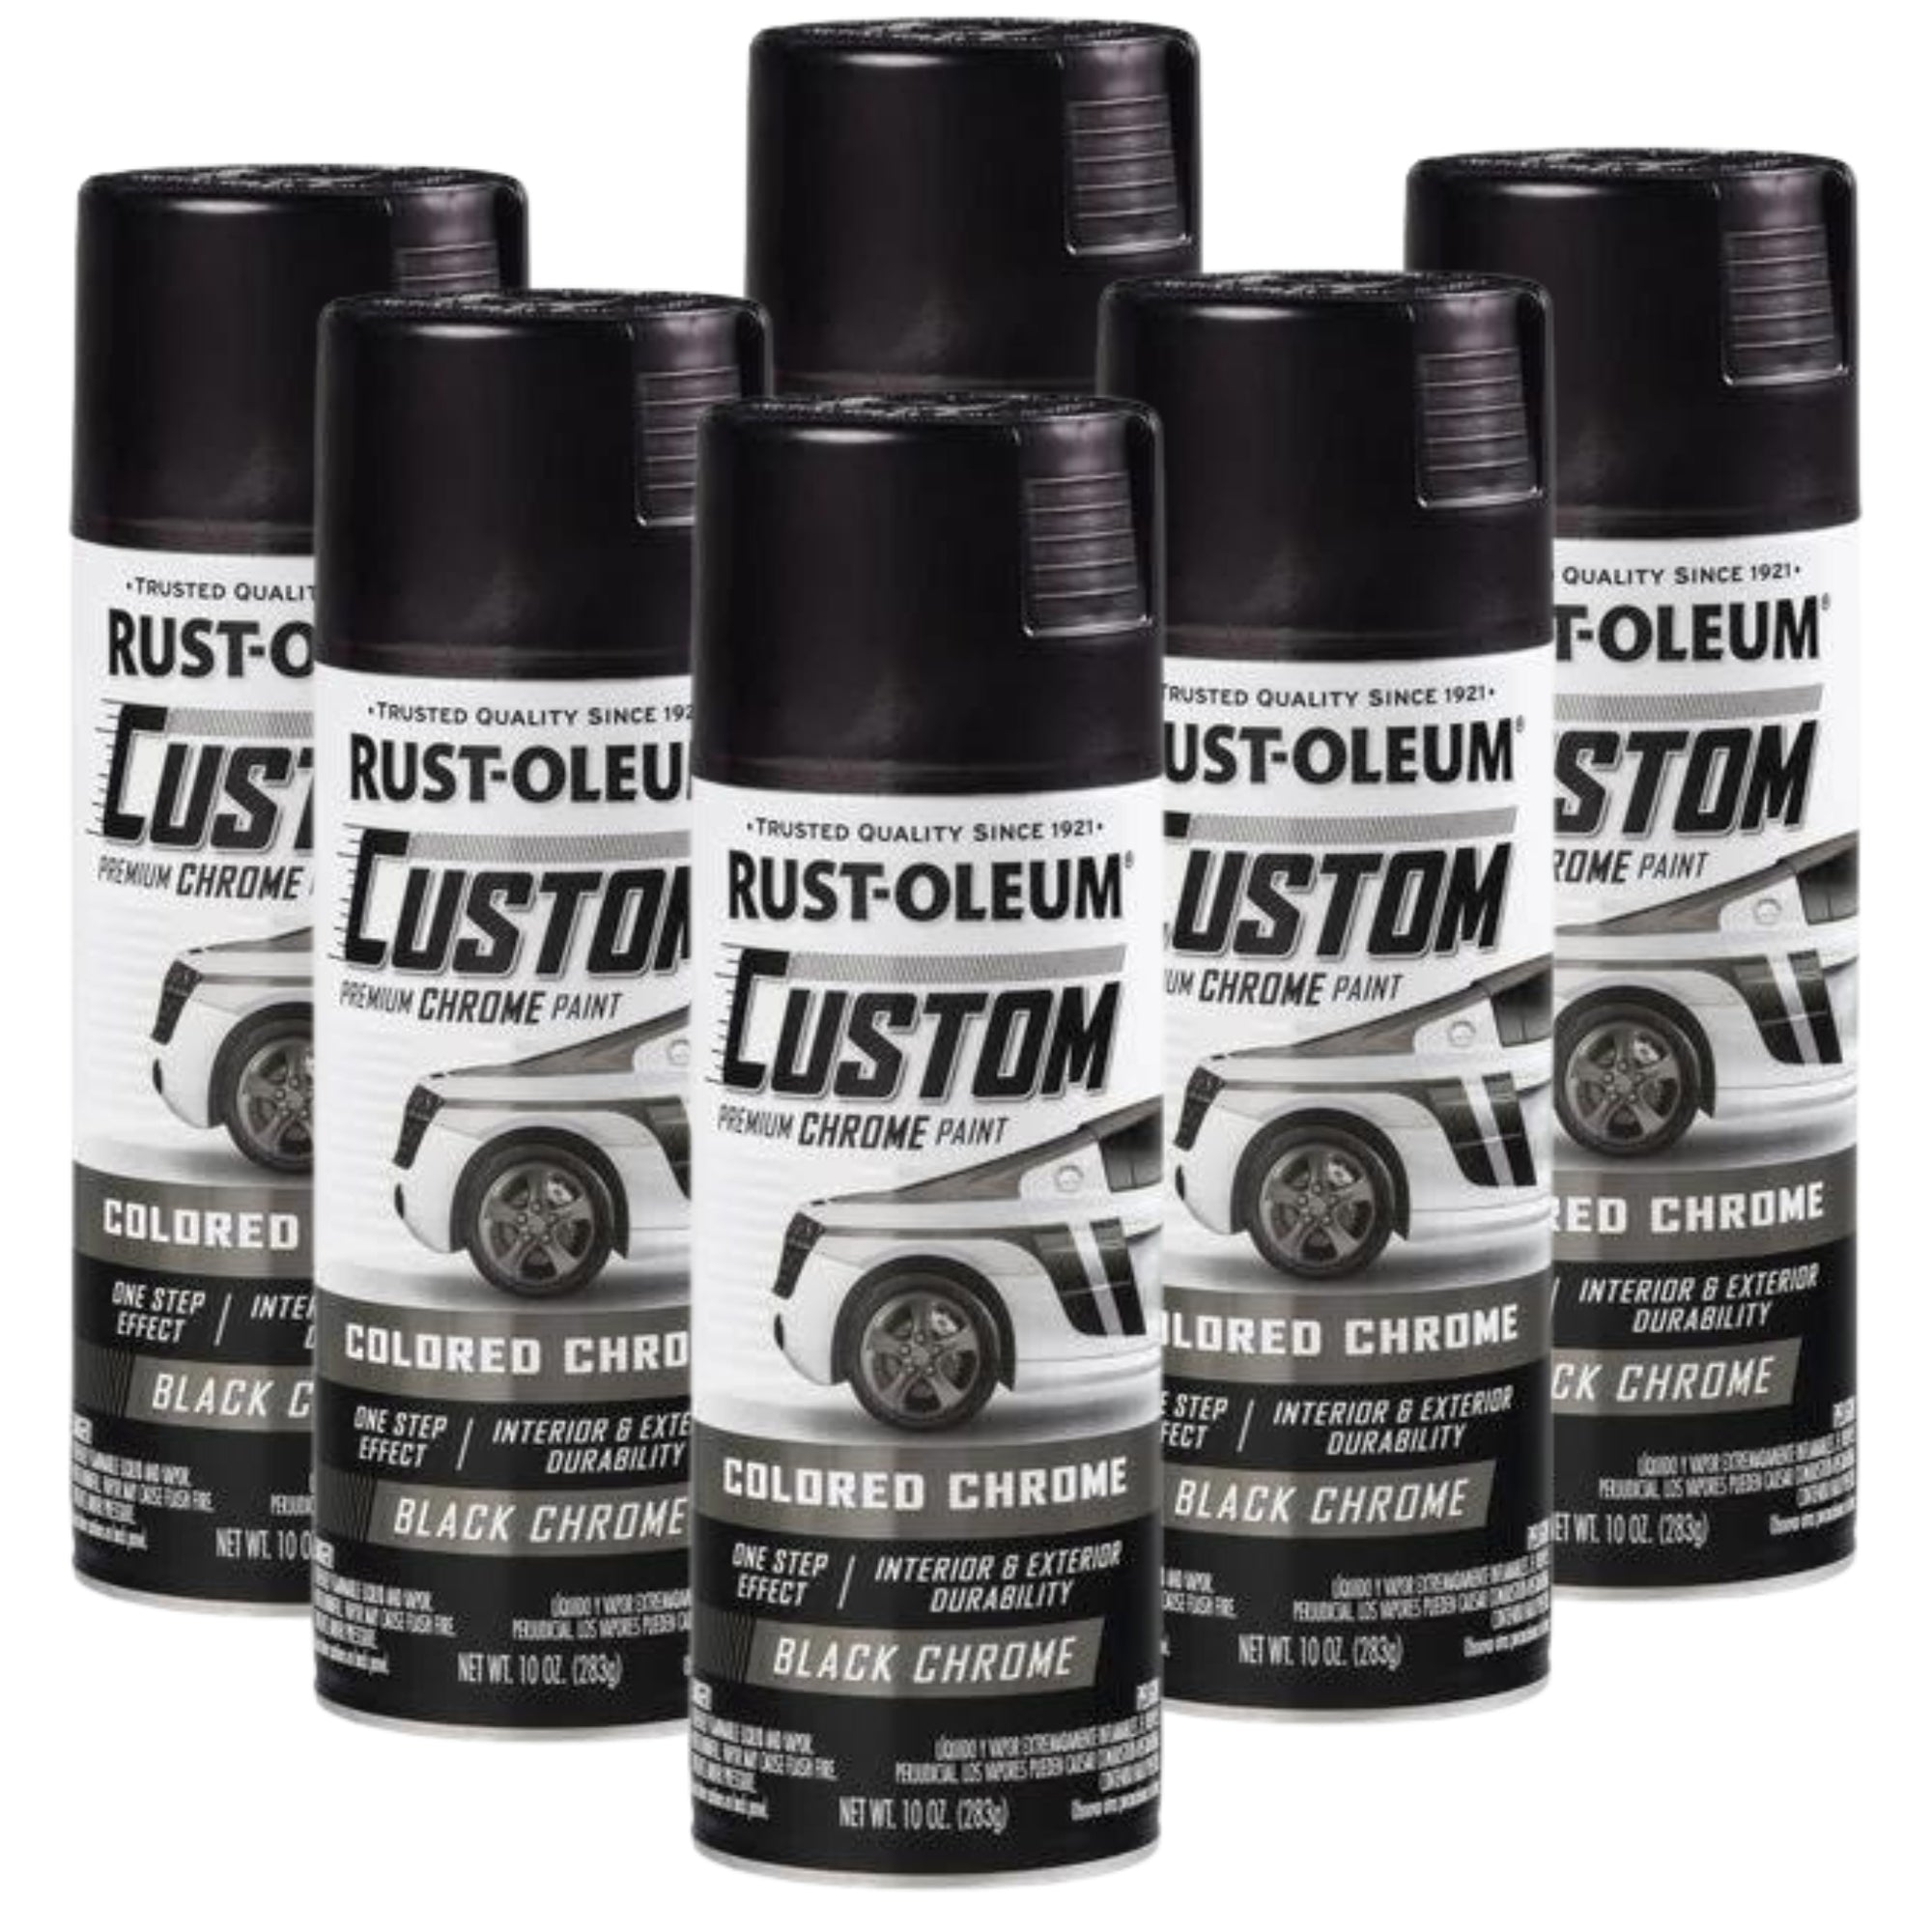 Rust-oleum Custom Lacquer Chrome Black 312g - 343346 (6 Cans) - South East Clearance Centre